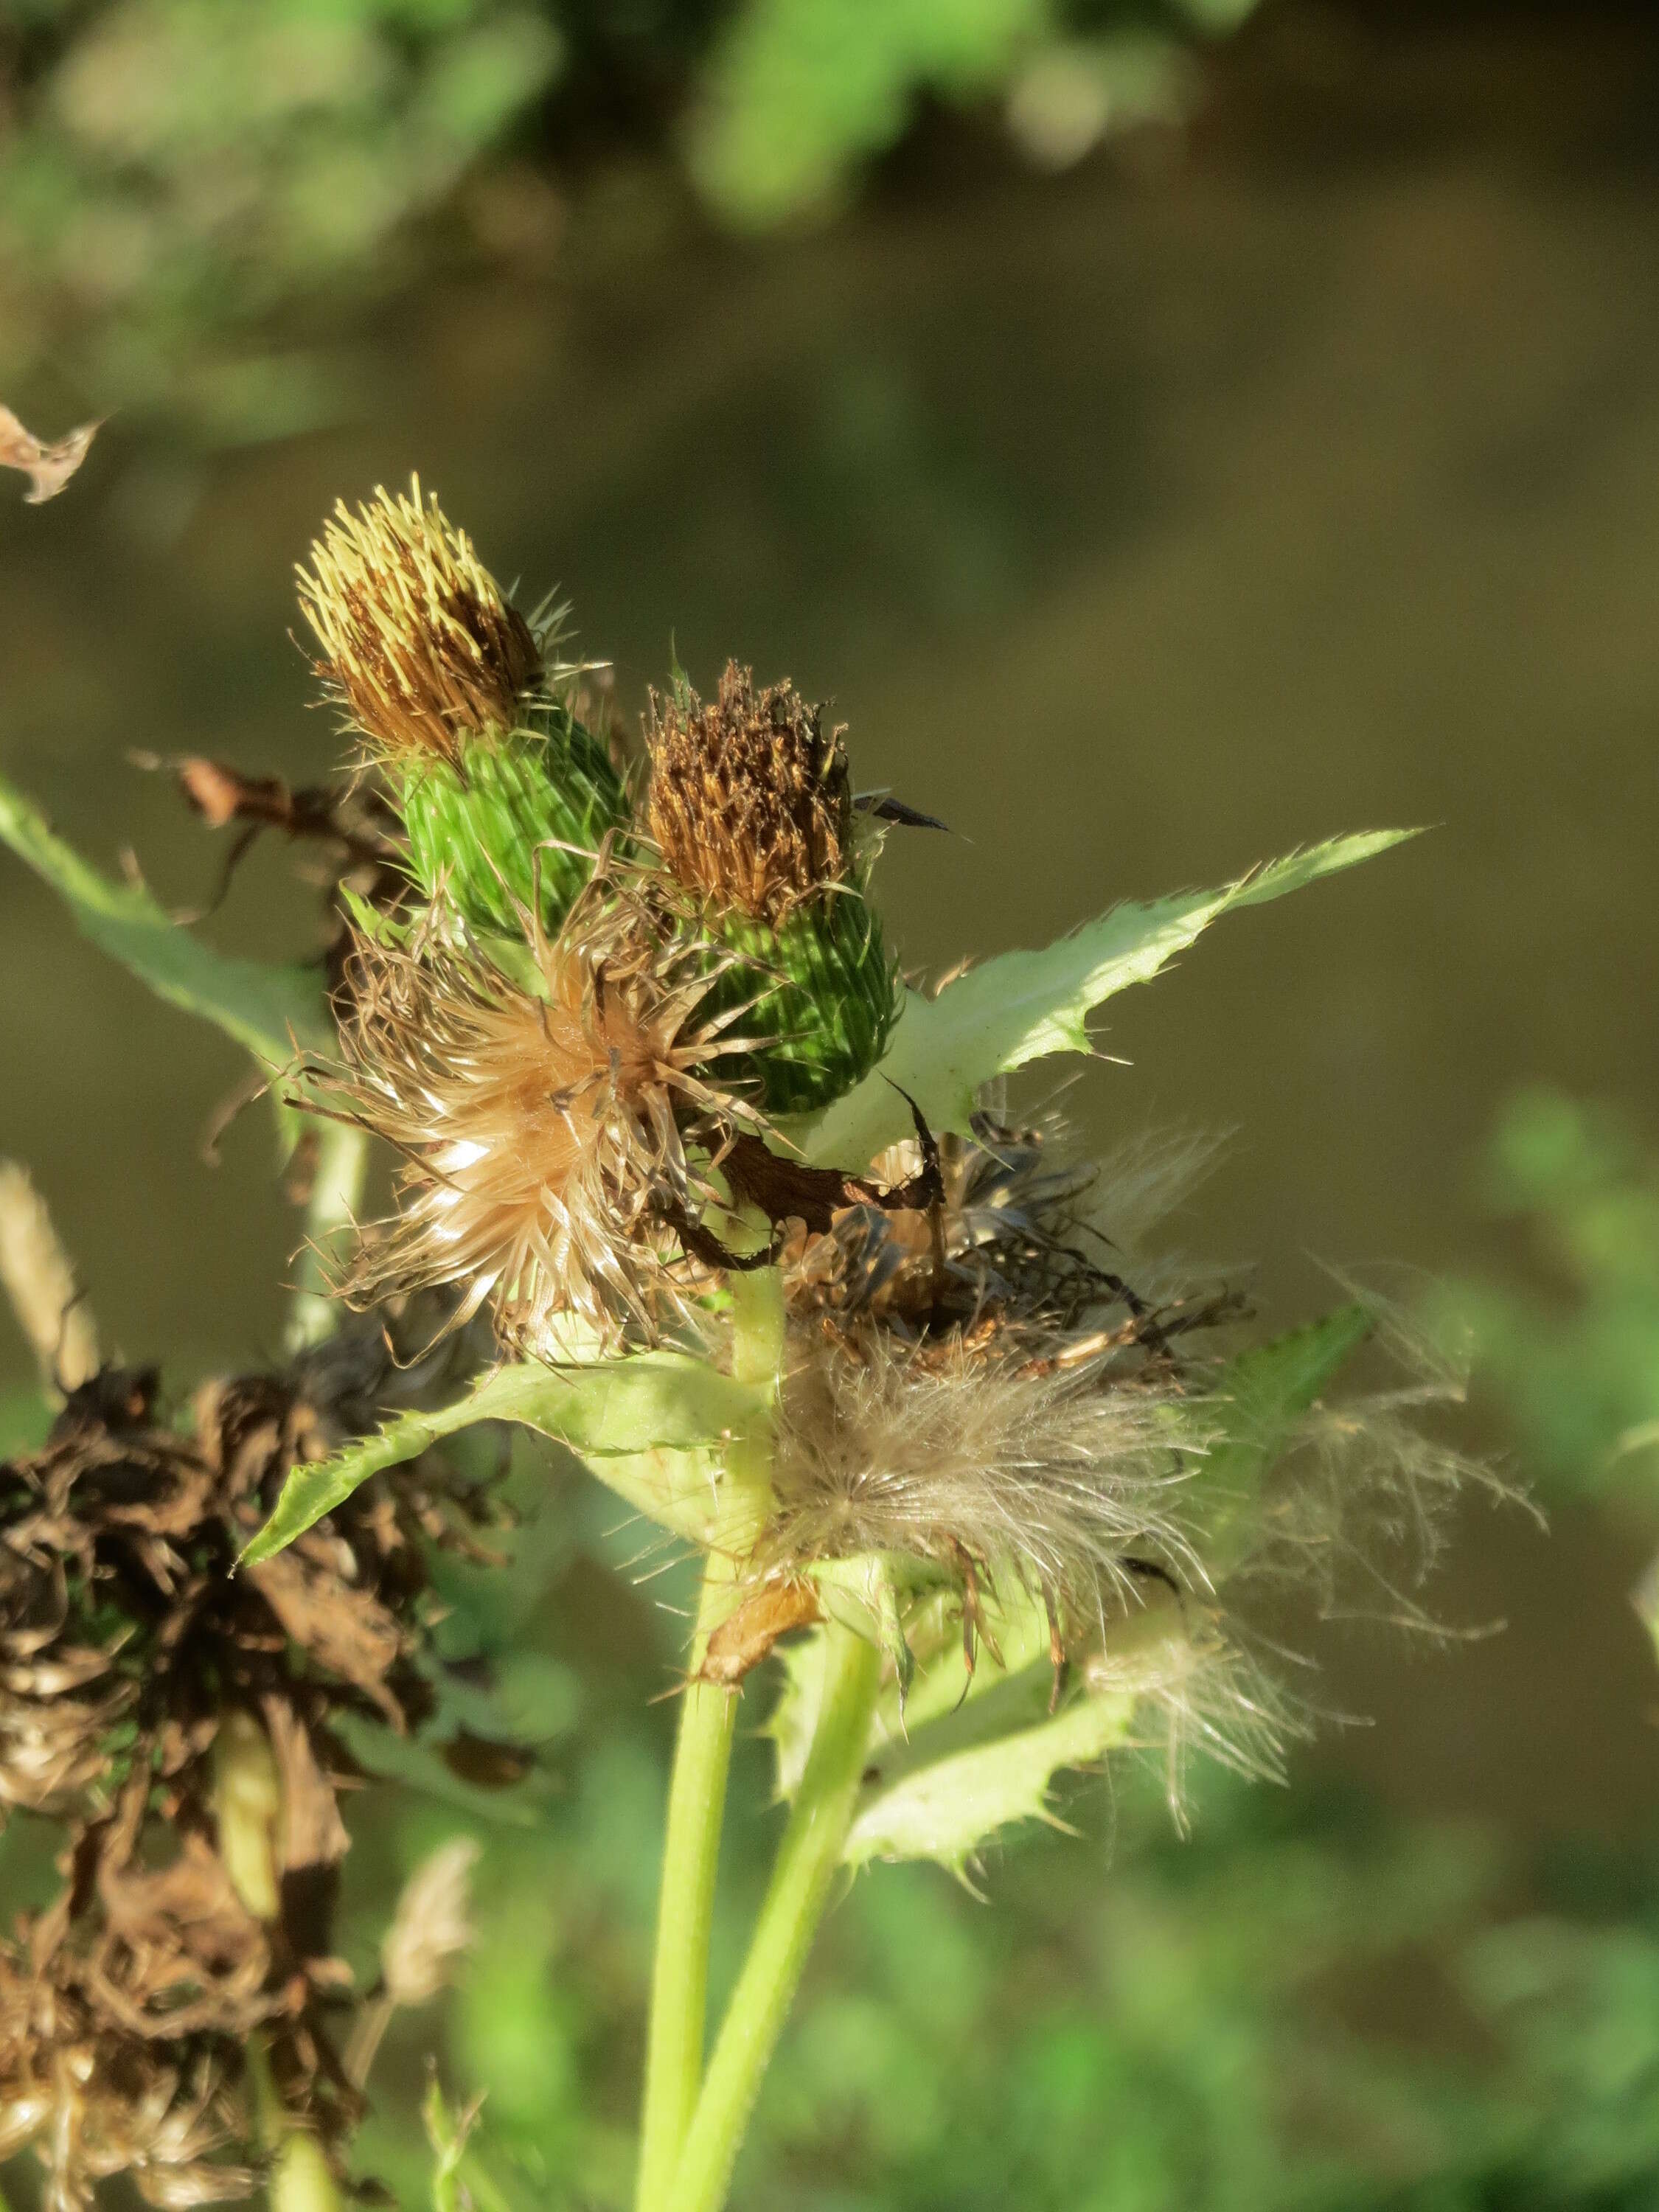 Image of Cabbage Thistle